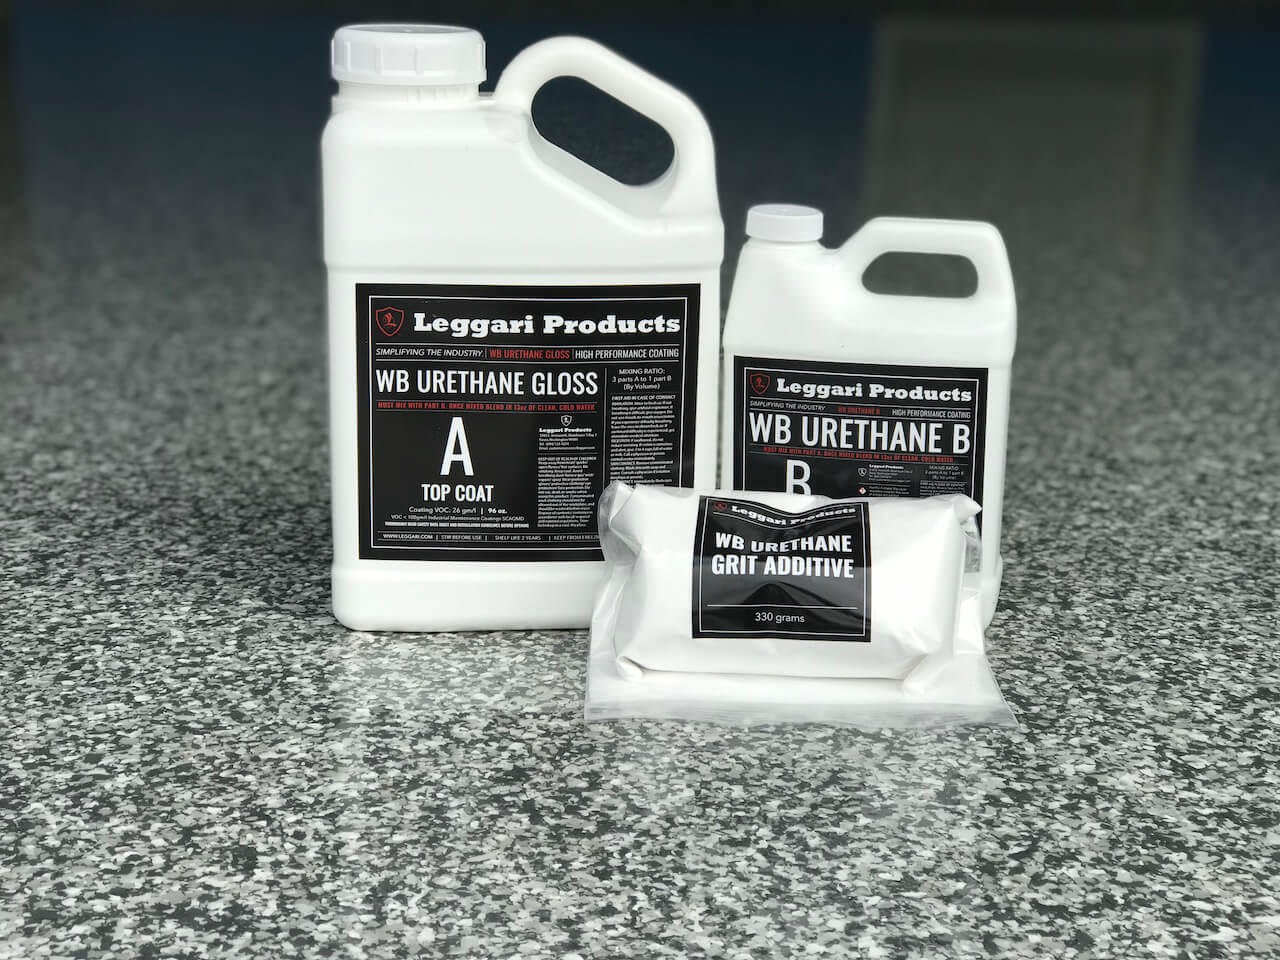 WB urethane gloss top coat (Part A and Part B) shown with optional WB urethane grit additive.